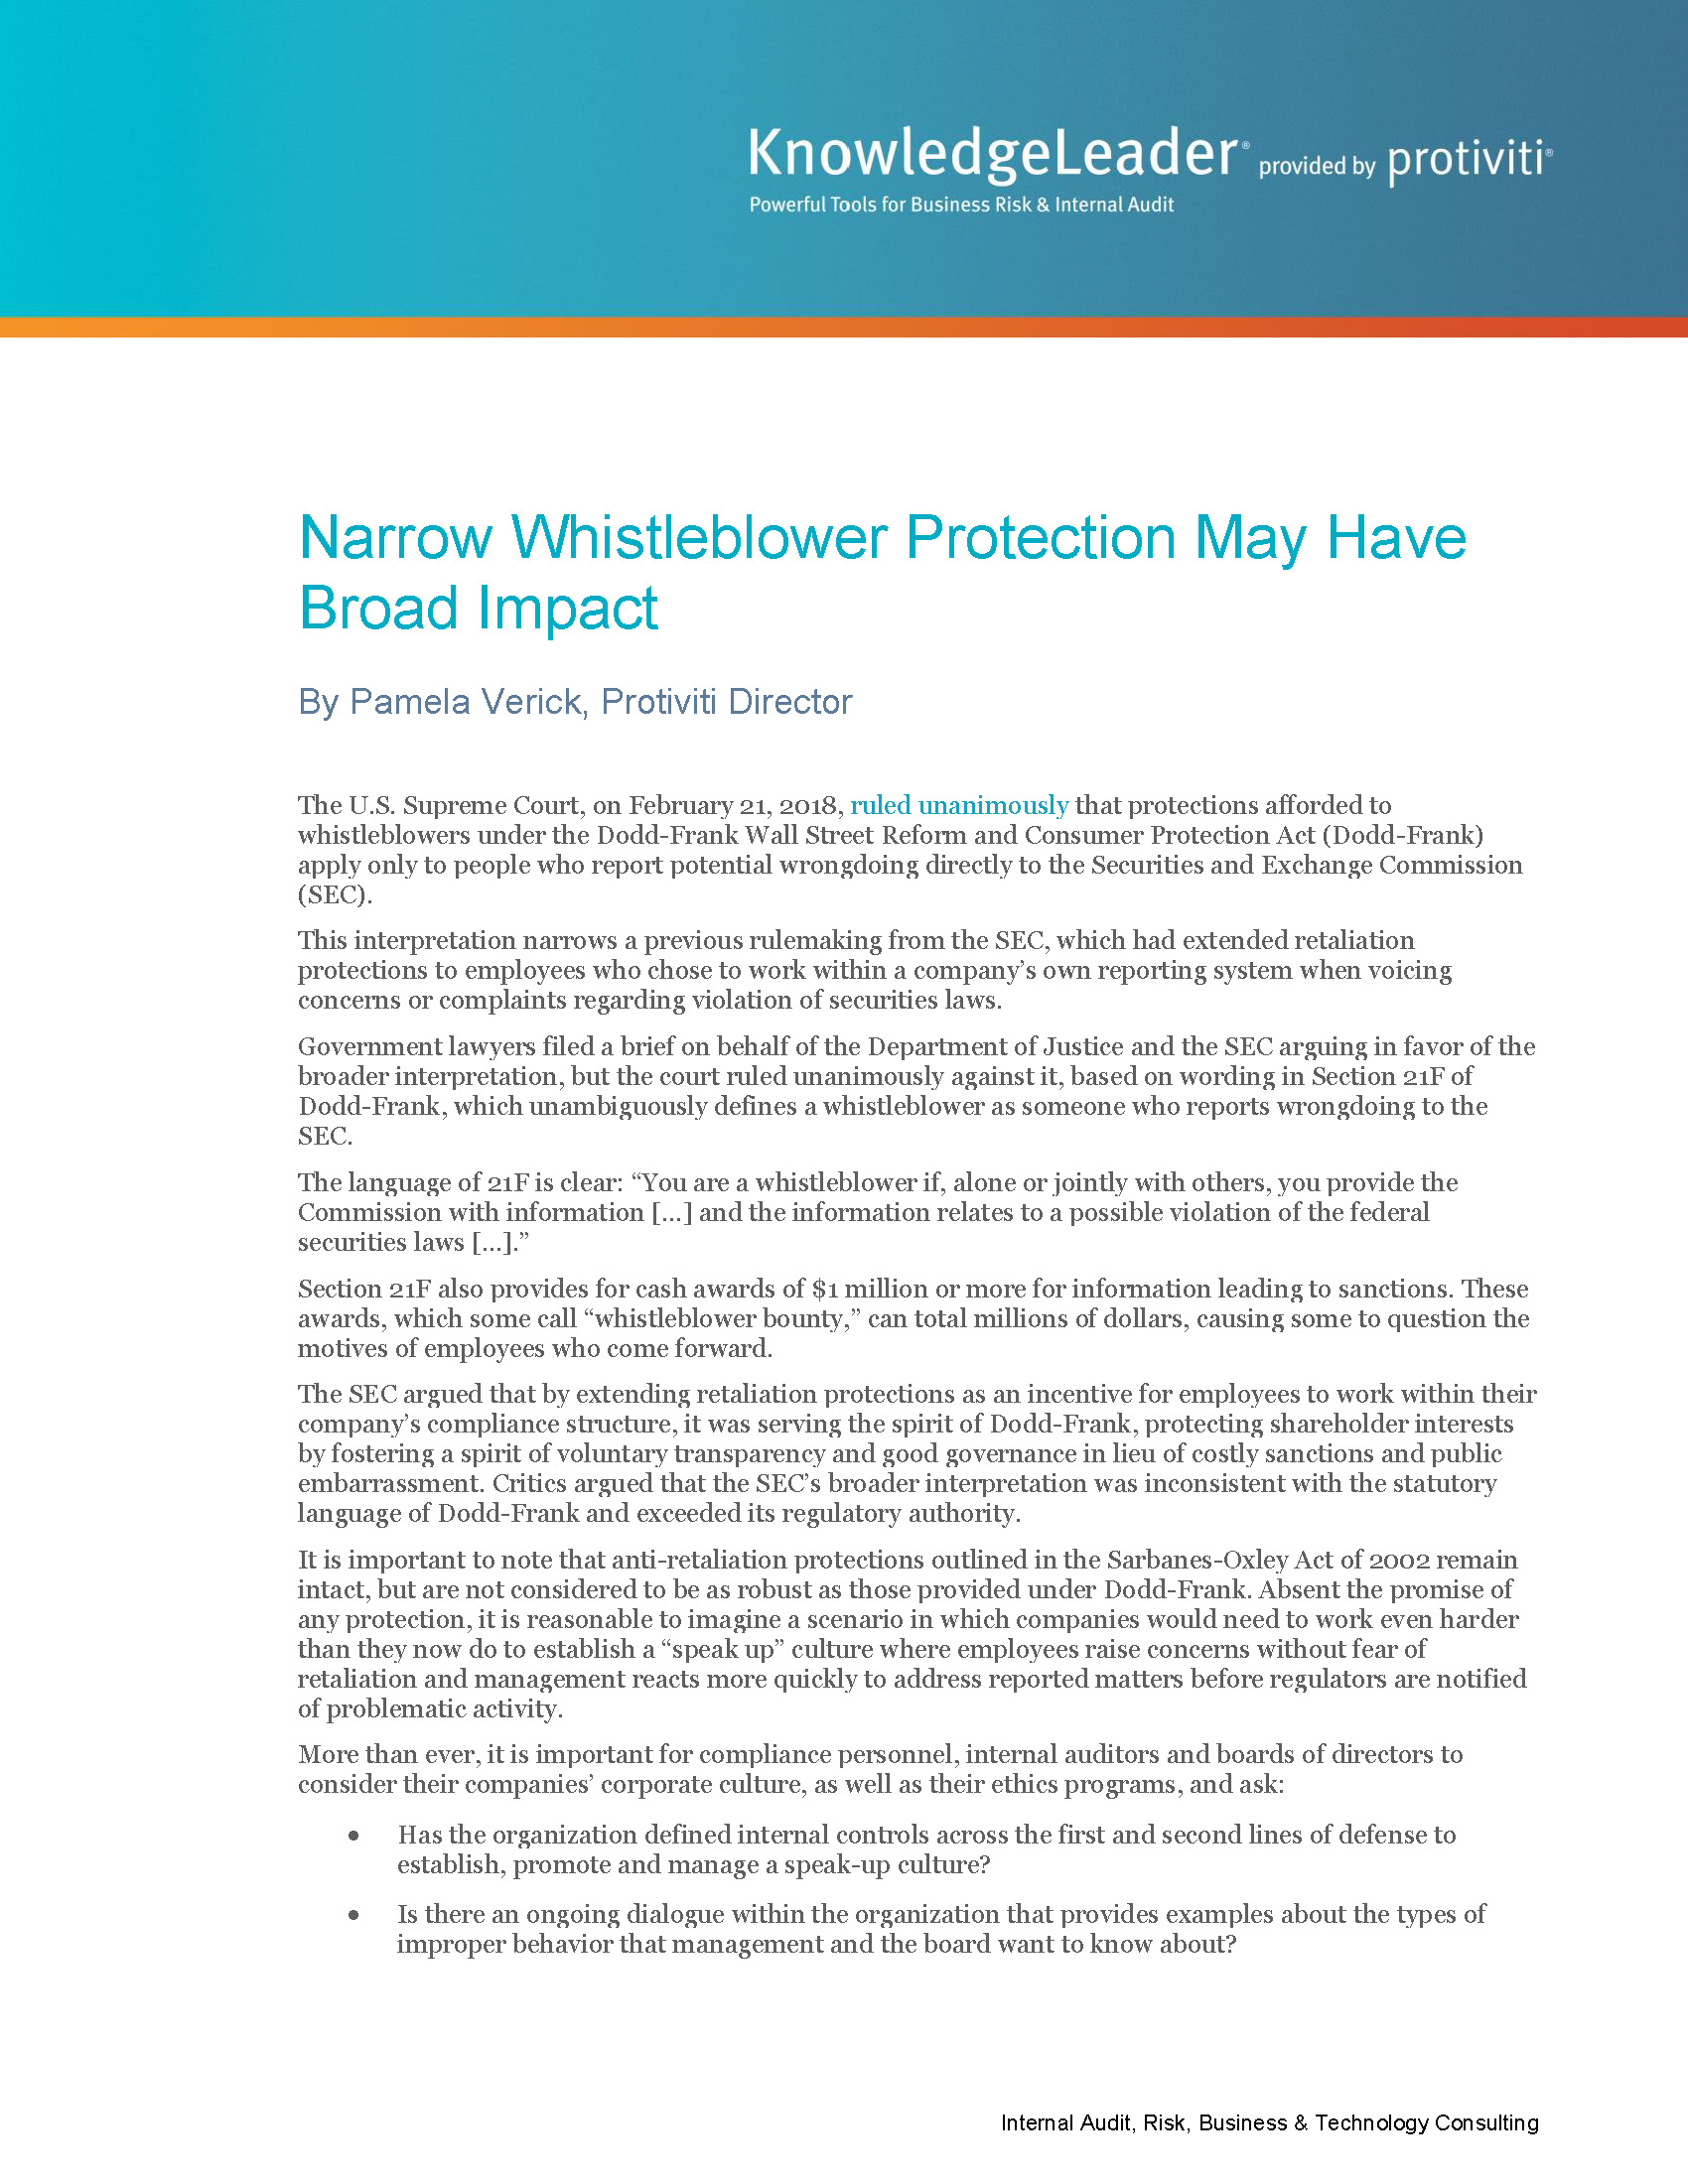 Screenshot of the first page of Narrow Whistleblower Protection May Have Broad Impact